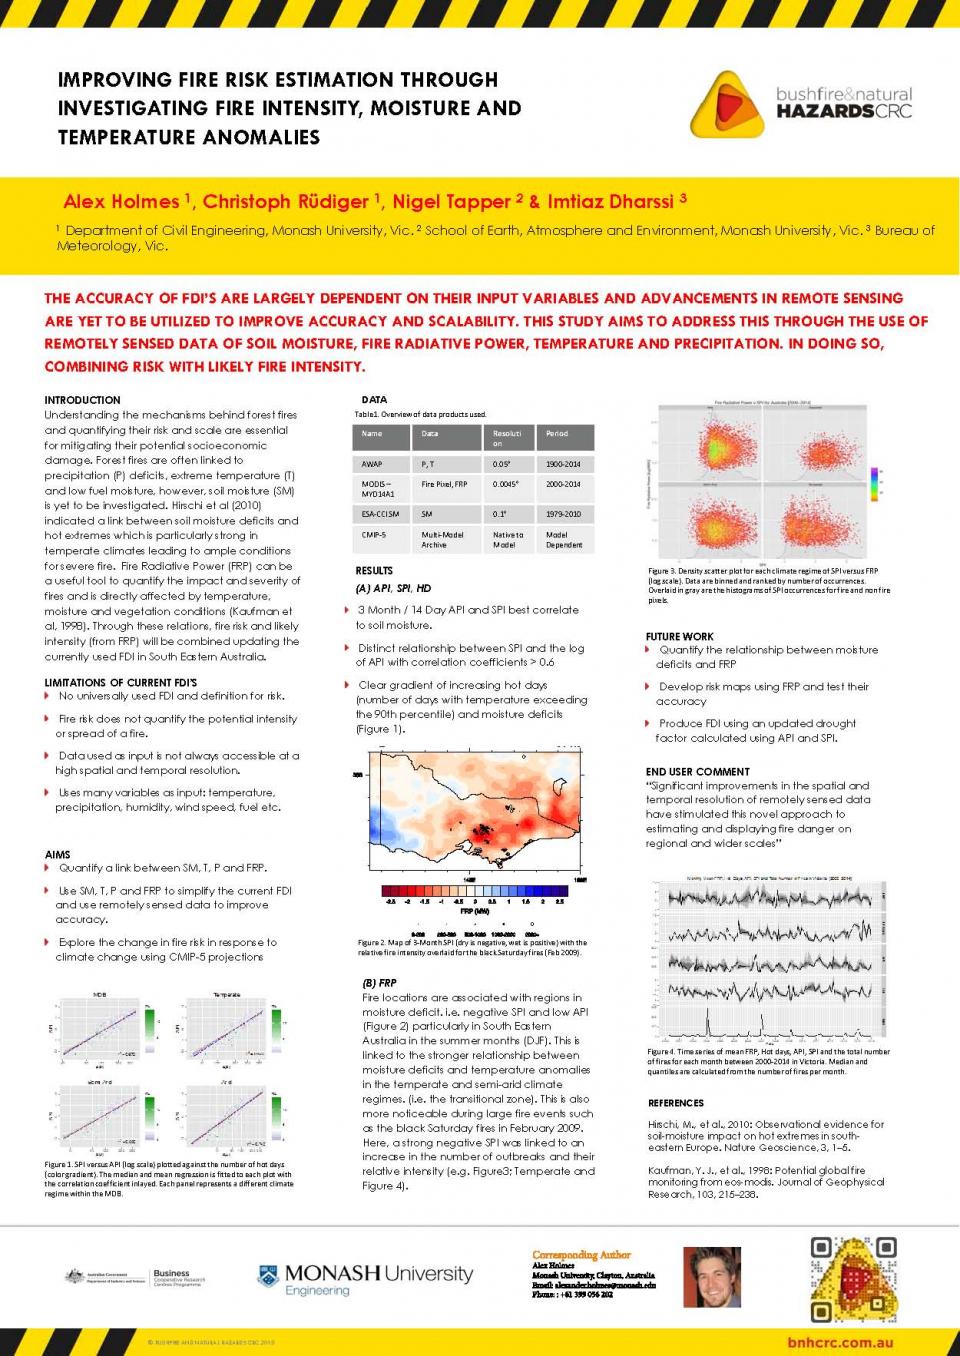 Improving Fire Risk Estimation through Investigating Fire Intensity, Moisture and Temperature Anomalies